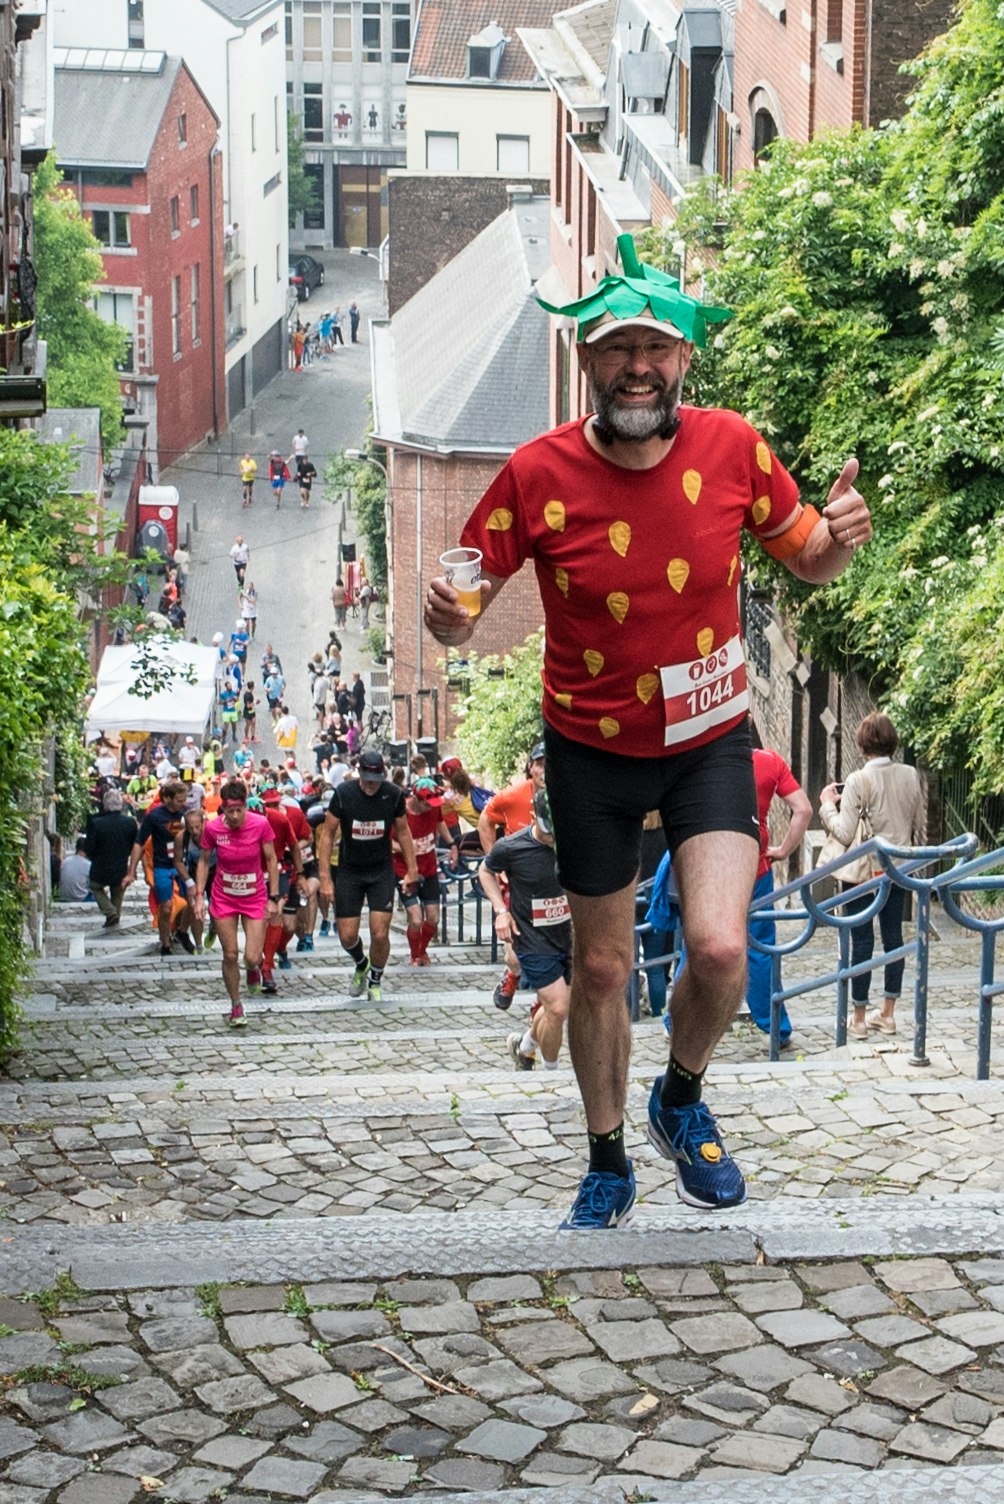 Many runners are climbing a steep set of stairs in a city. In the foreground, a man dressed as a strawberry is smiling at the camera, holding a tumbler of beer in one hand and giving the thumbs-up sign with the other.